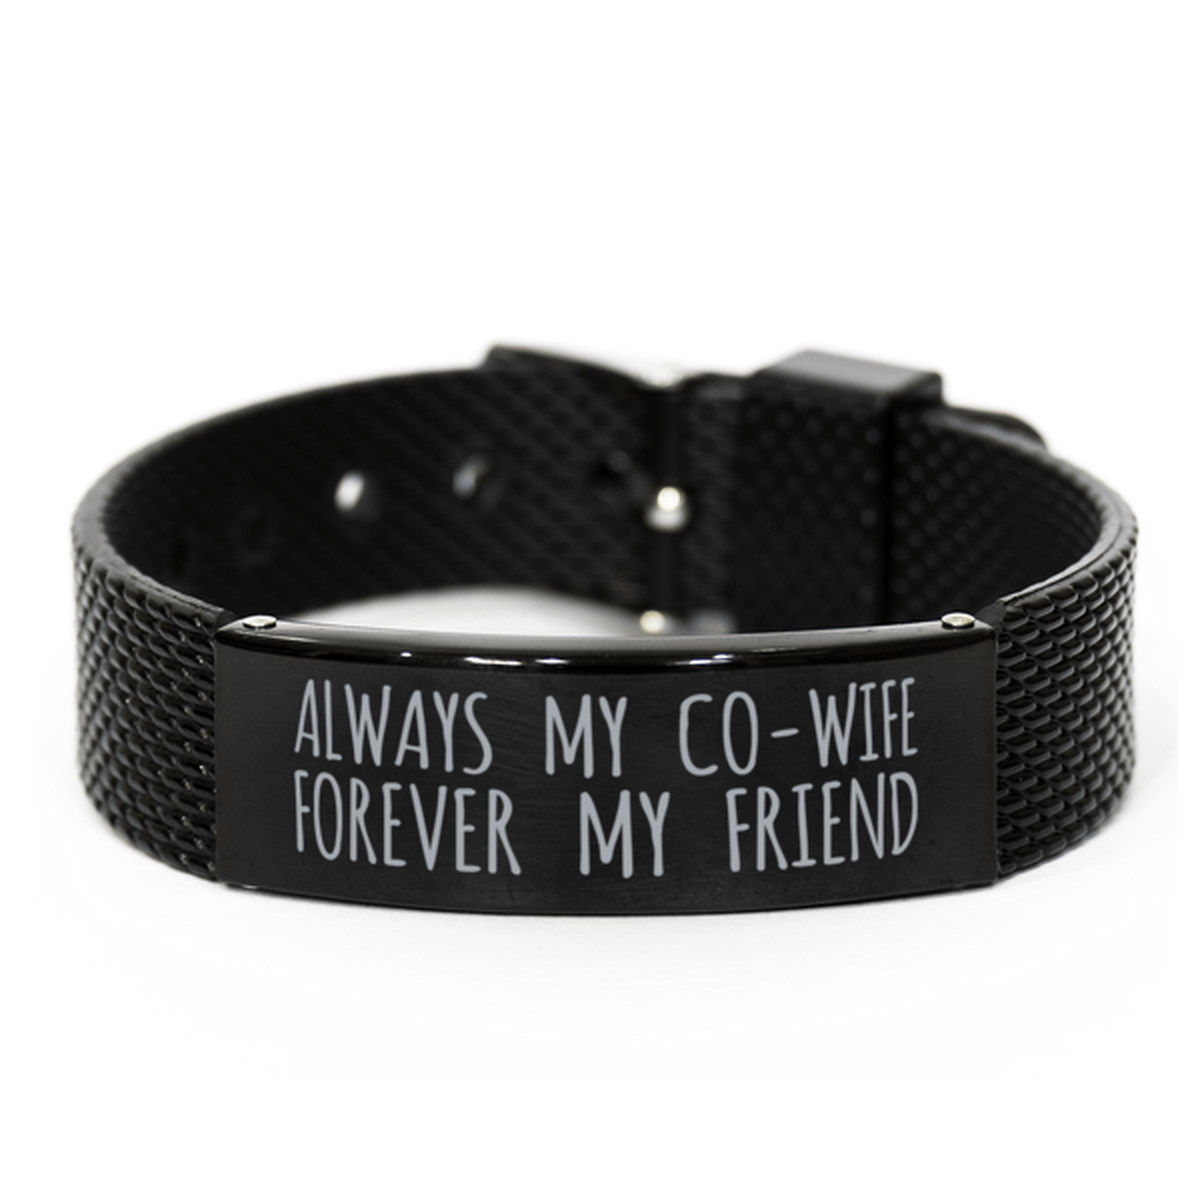 Inspirational Co-Wife Black Shark Mesh Bracelet, Always My Co-Wife Forever My Friend, Best Birthday Gifts for Family Friends